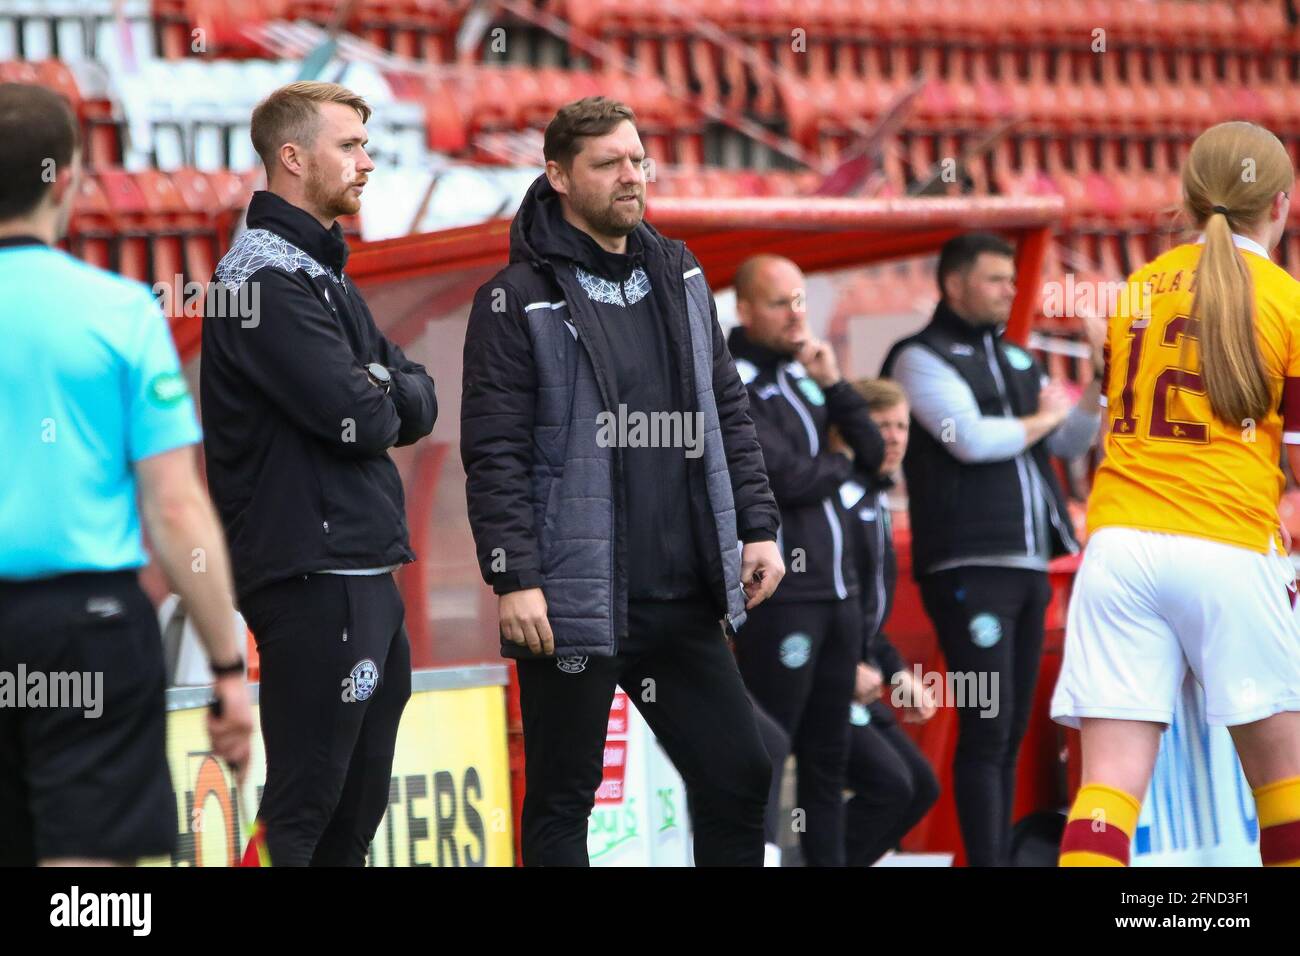 Airdrie, North Lanarkshire, 16th May 2021. Motherwell Women FC Coach, Stewart Hall & Motherwell Women FC Goal Keeper Coach, Iain McKay look on during the Scottish Building Society Scottish Women's Premier League 1 Fixture Motherwell FC Vs Hibernian FC, Penny Cars Stadium, Airdrie, North Lanarkshire, 16th May 2021 | Credit Colin Poultney |  Credit: Colin Poultney/Alamy Live News Stock Photo